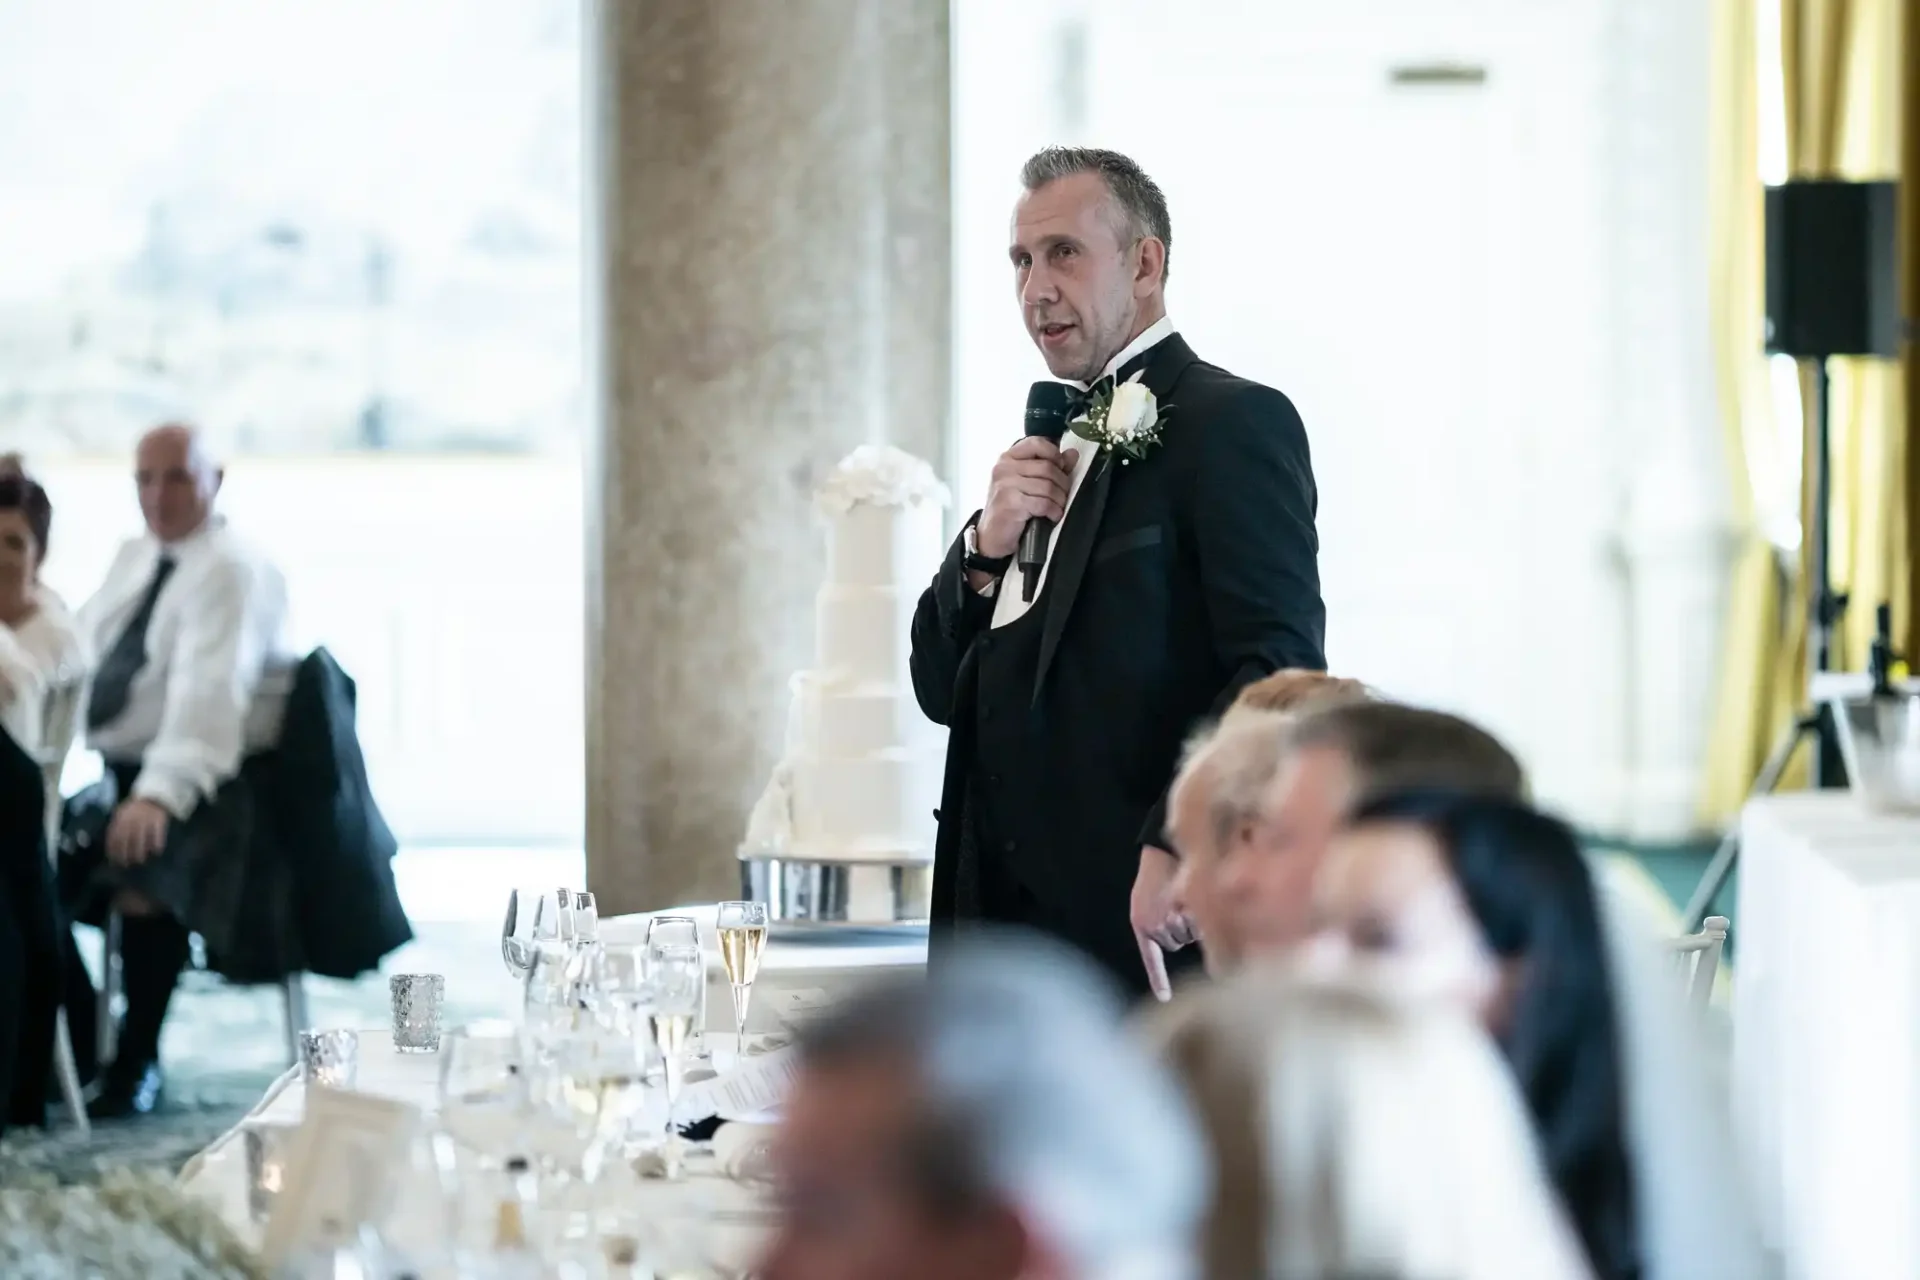 Man in suit giving a speech at a wedding reception, holding a microphone, with guests seated at tables.